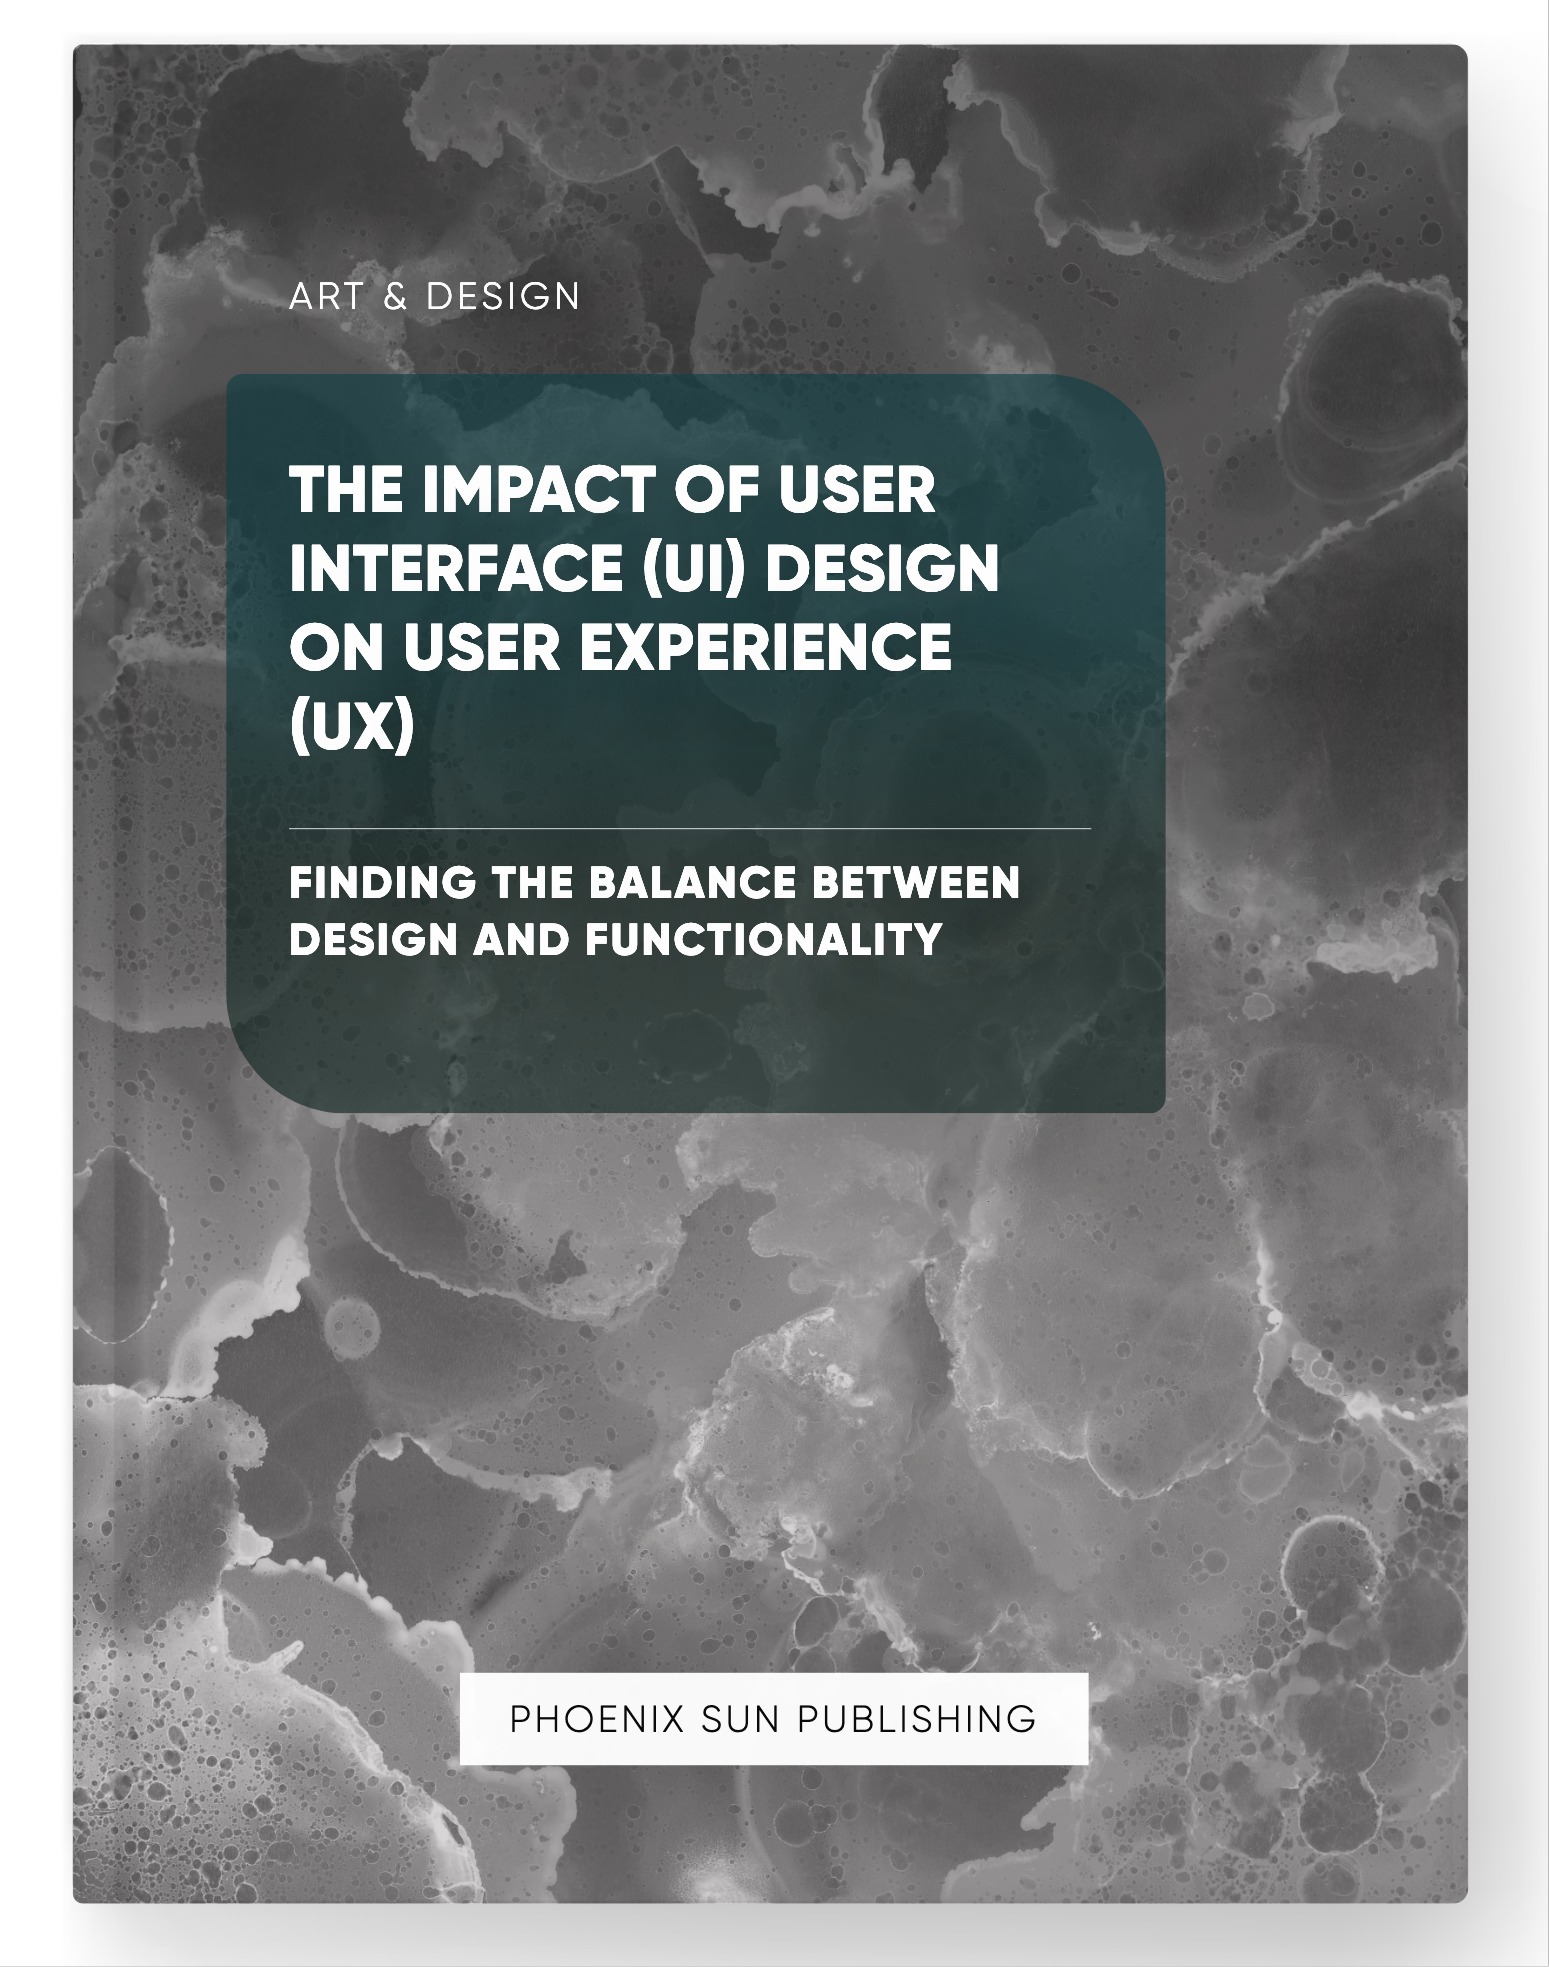 The Impact of User Interface (UI) Design on User Experience (UX) – Finding the Balance Between Design and Functionality